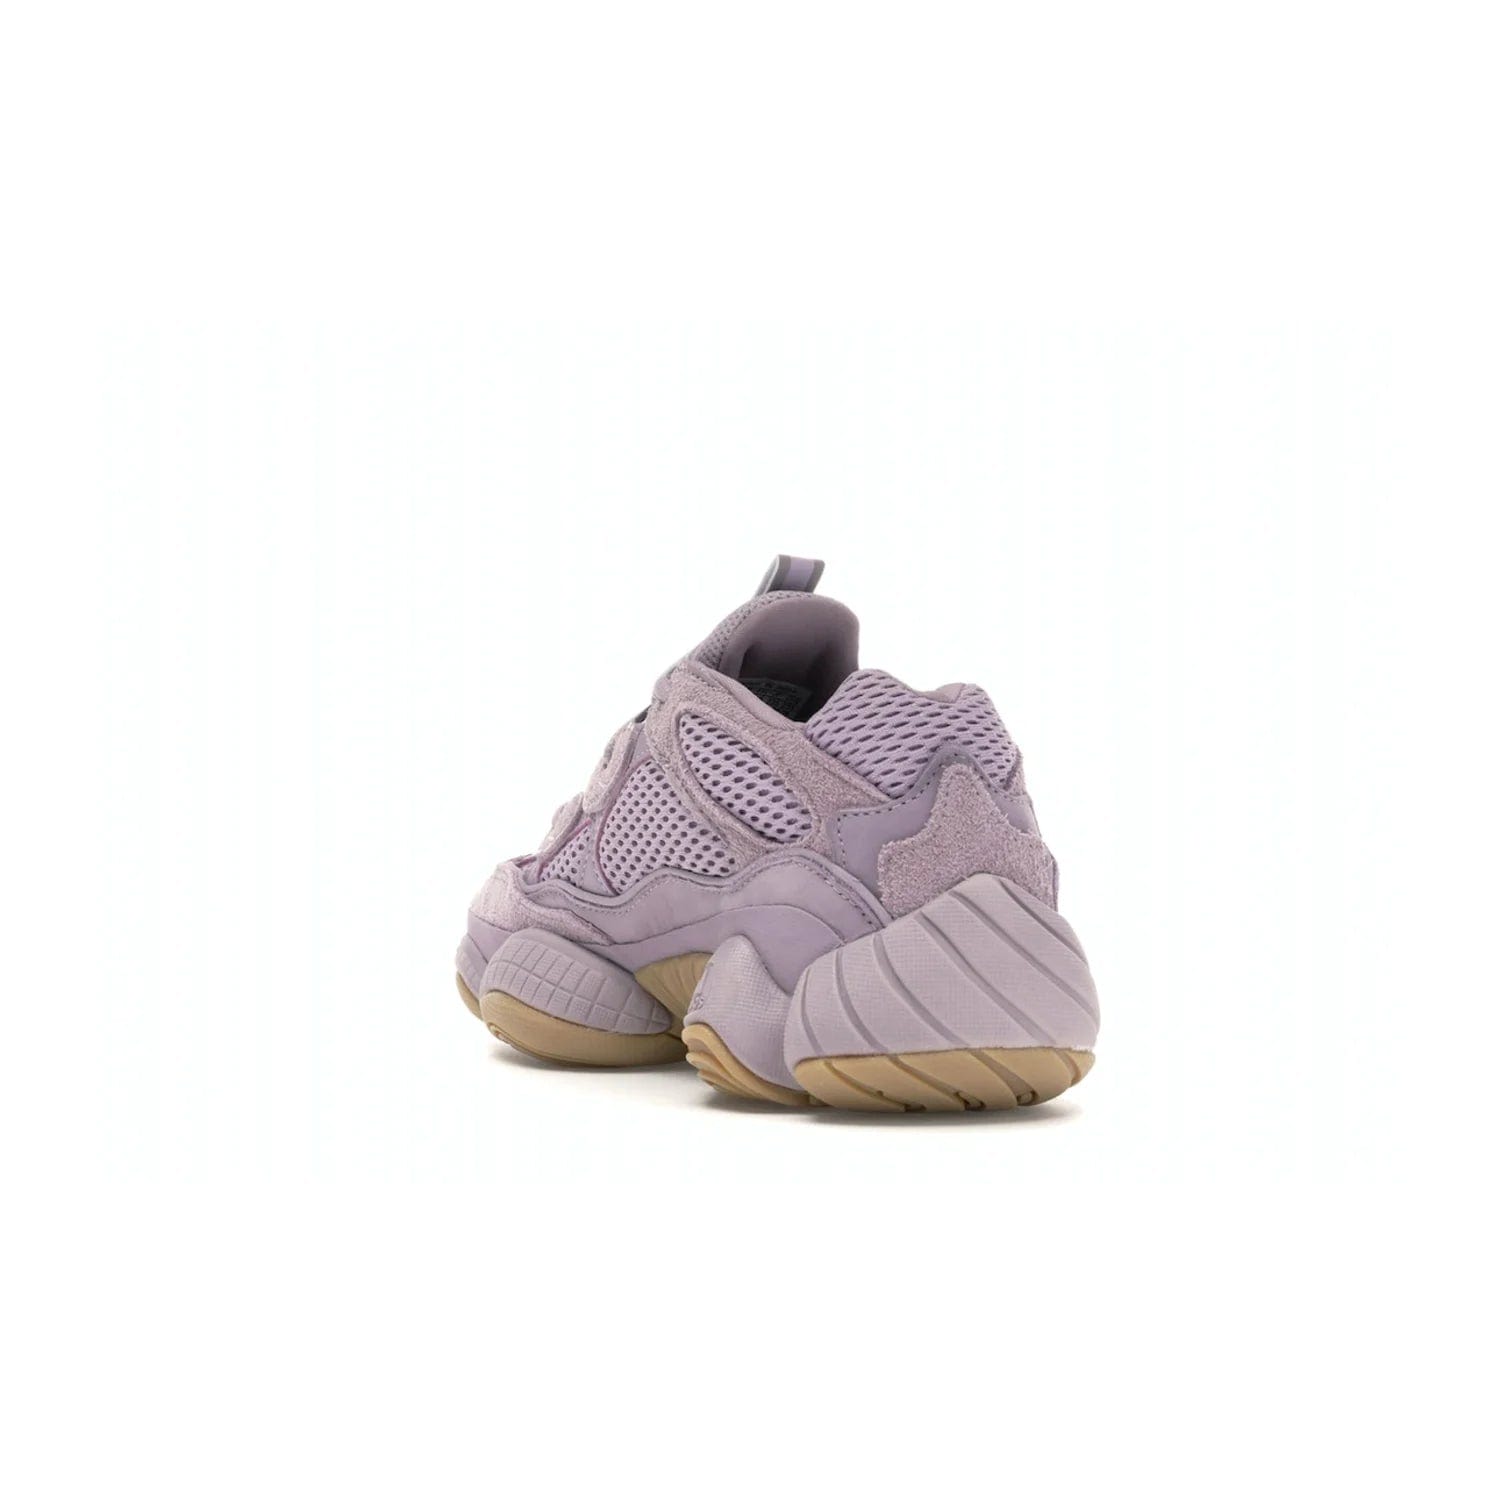 adidas Yeezy 500 Soft Vision - Image 25 - Only at www.BallersClubKickz.com - New adidas Yeezy 500 Soft Vision sneaker featuring a combination of mesh, leather, and suede in a classic Soft Vision colorway. Gum rubber outsole ensures durability and traction. An everyday sneaker that stands out from the crowd.